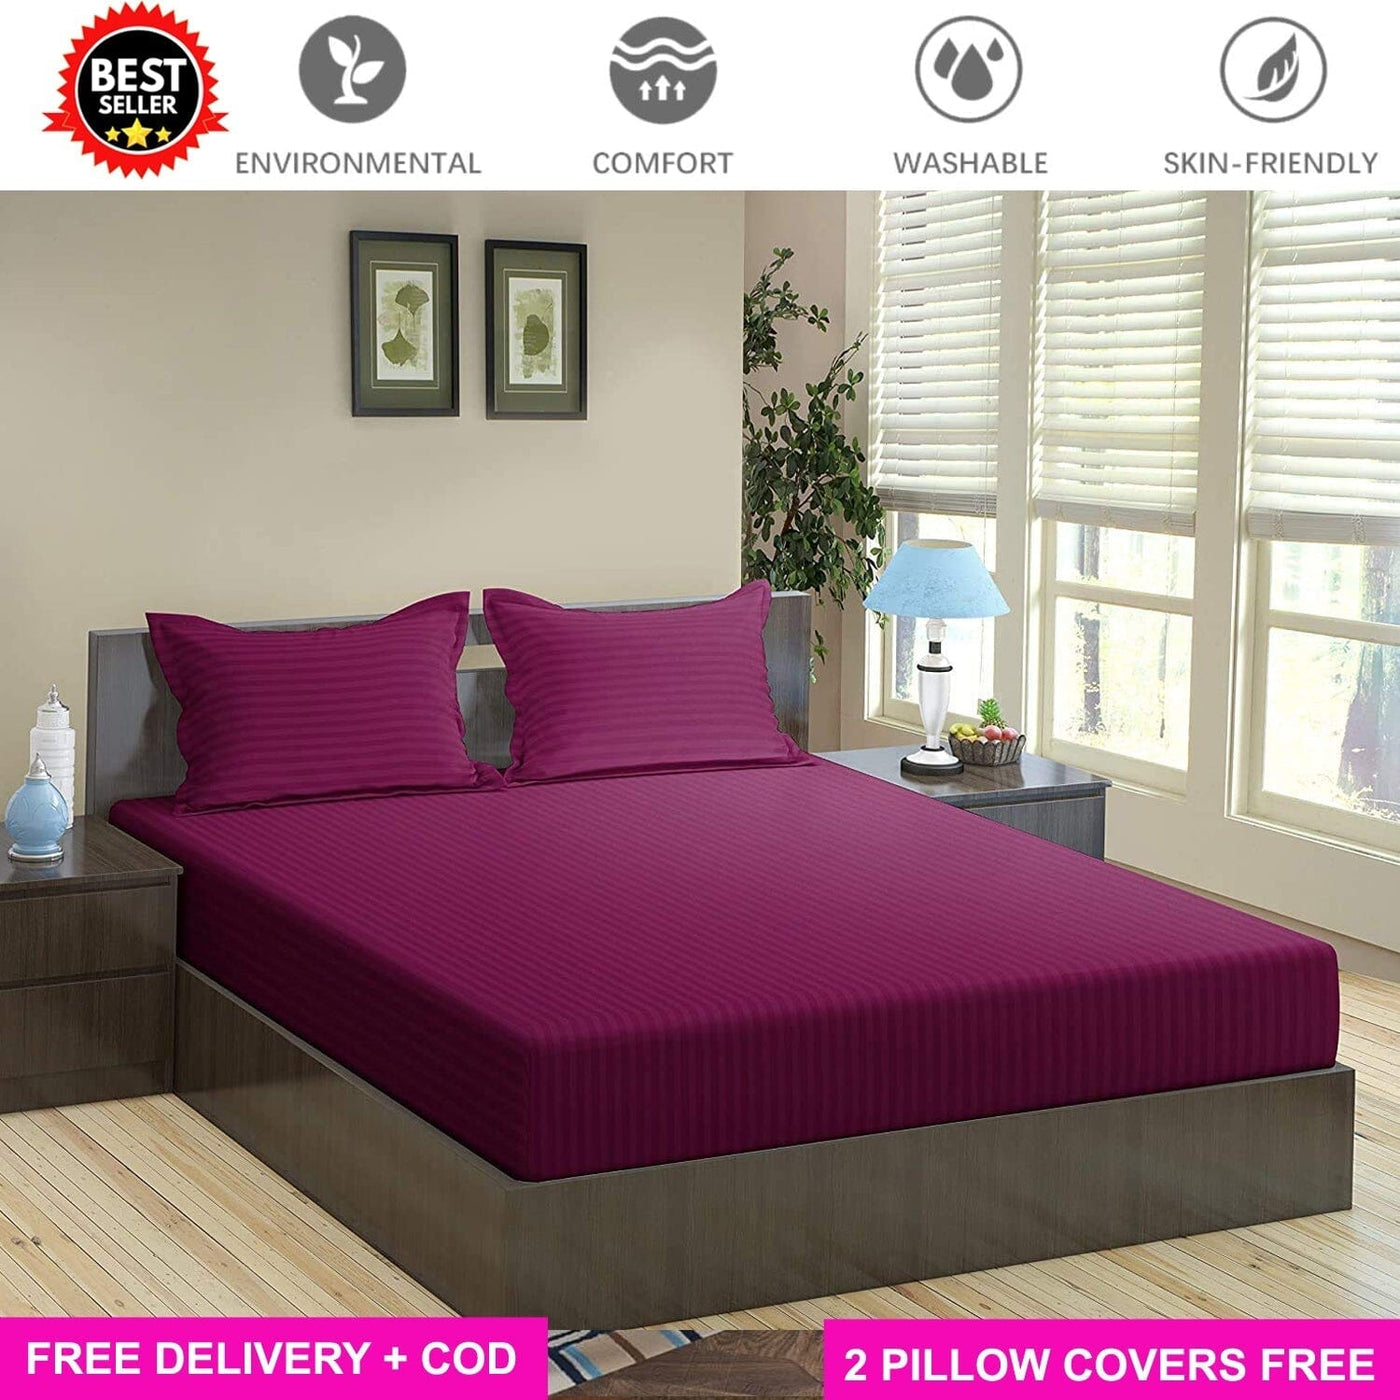 Plain Wine Full Elastic Fitted Bedsheet with 2 Pillow Covers Bed Sheets Great Happy IN KING SIZE - ₹1299 